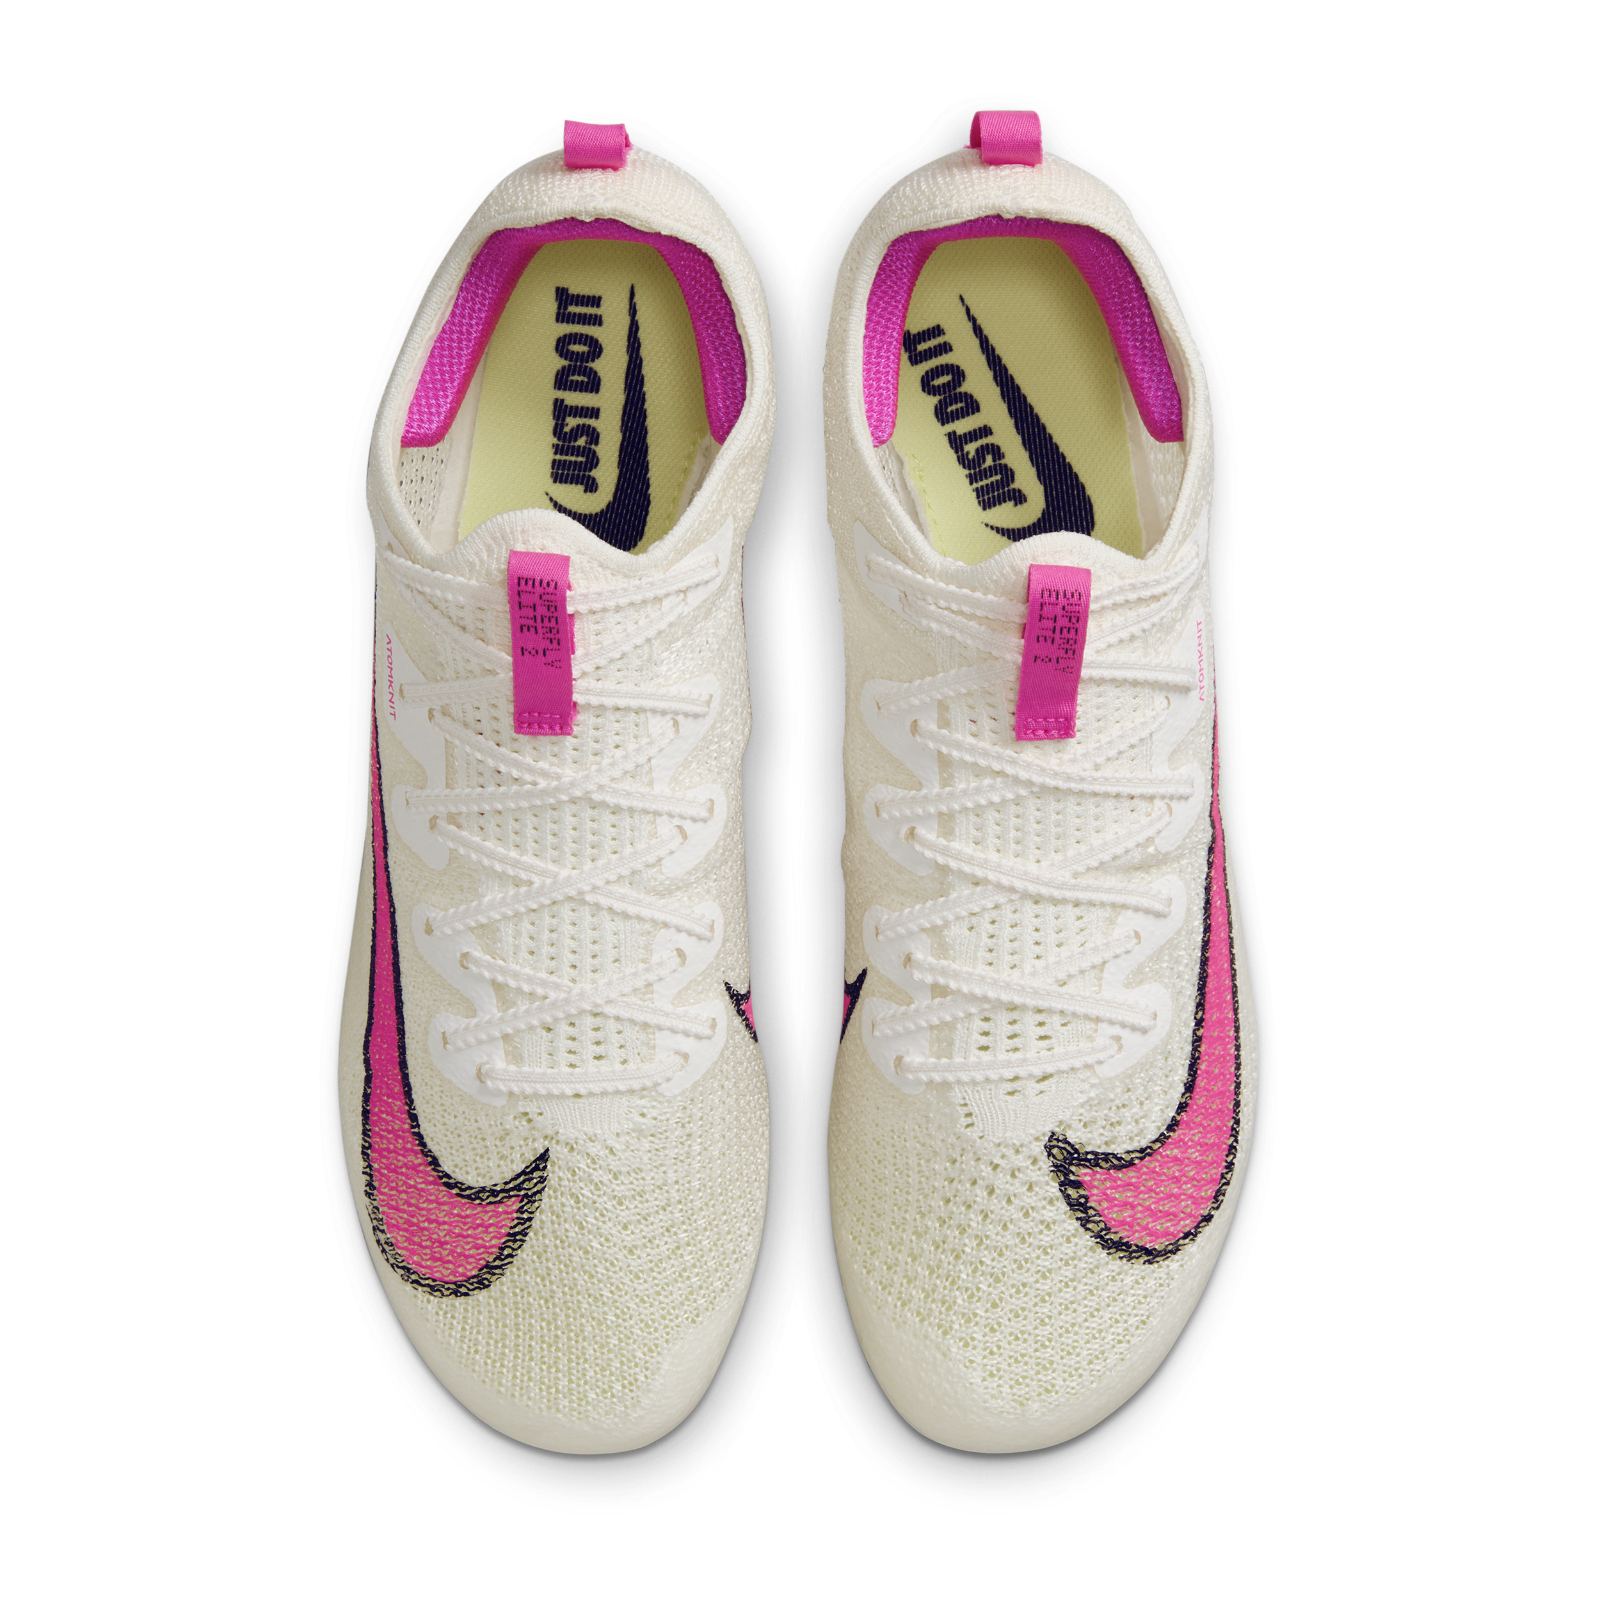 Tretra Zoom Superfly Elite 2 Track & Field Jumping